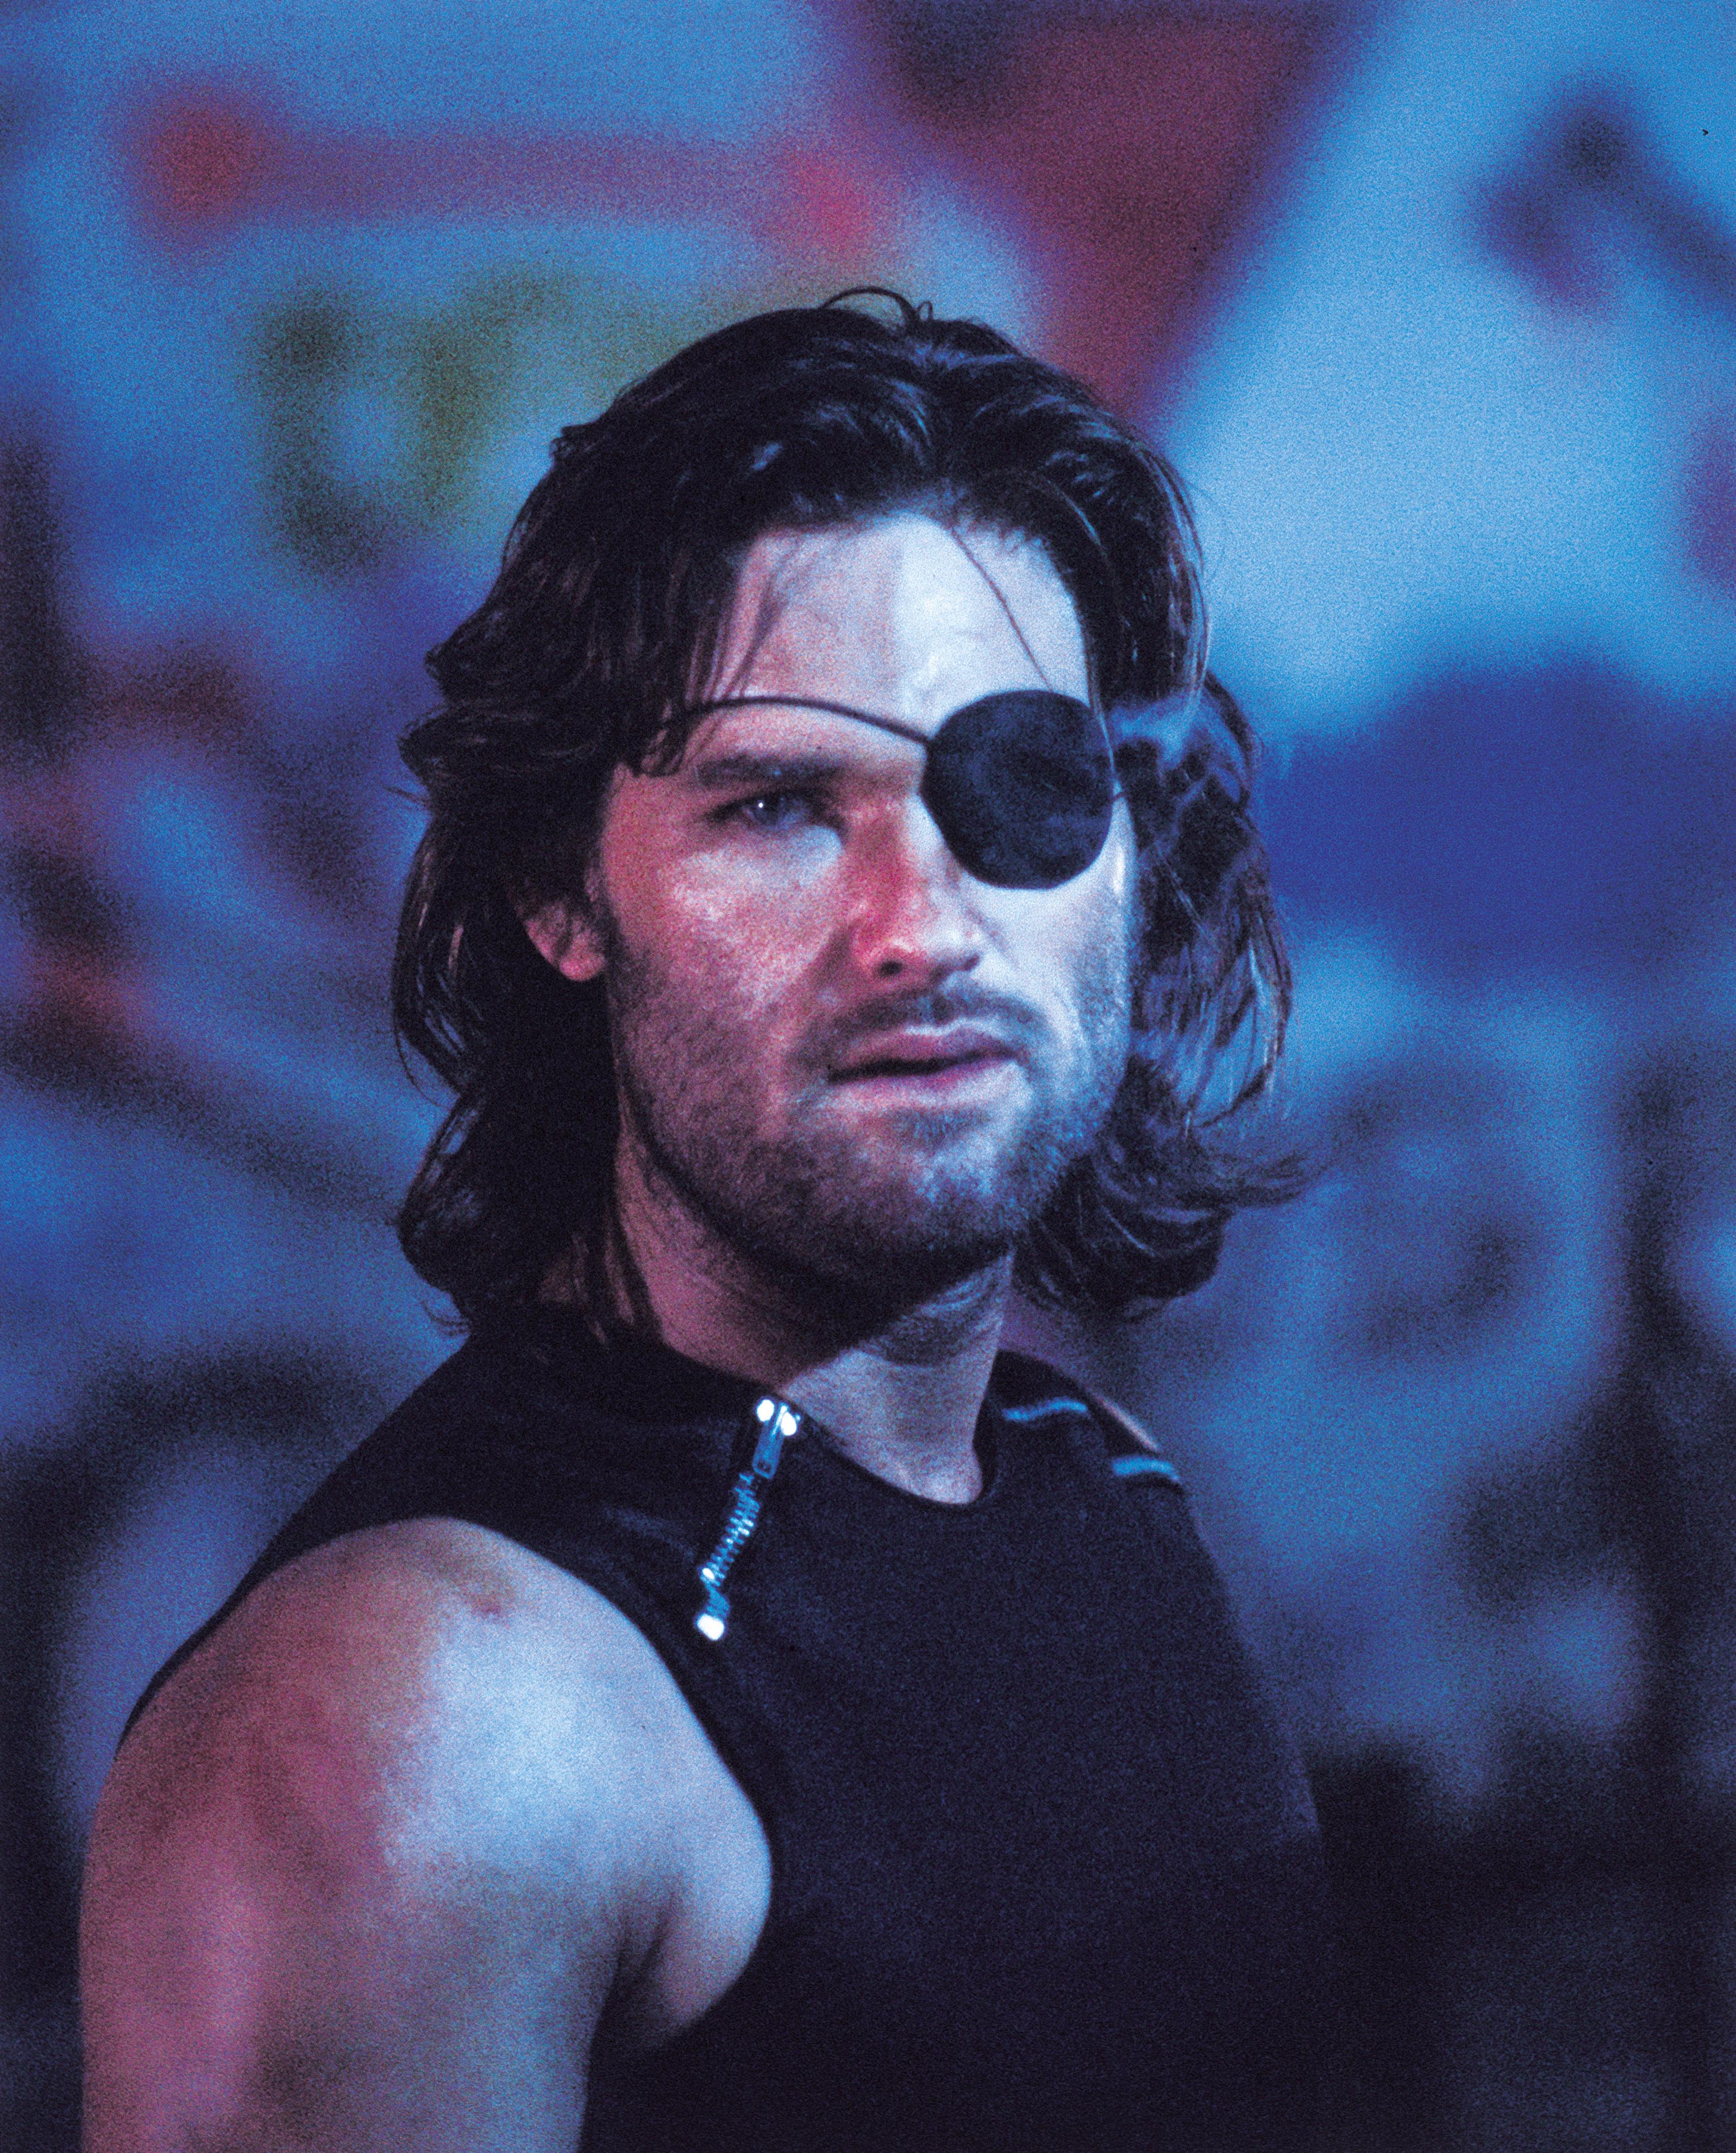 Still of John Carpenter and Kurt Russell in Escape from New York (1981)